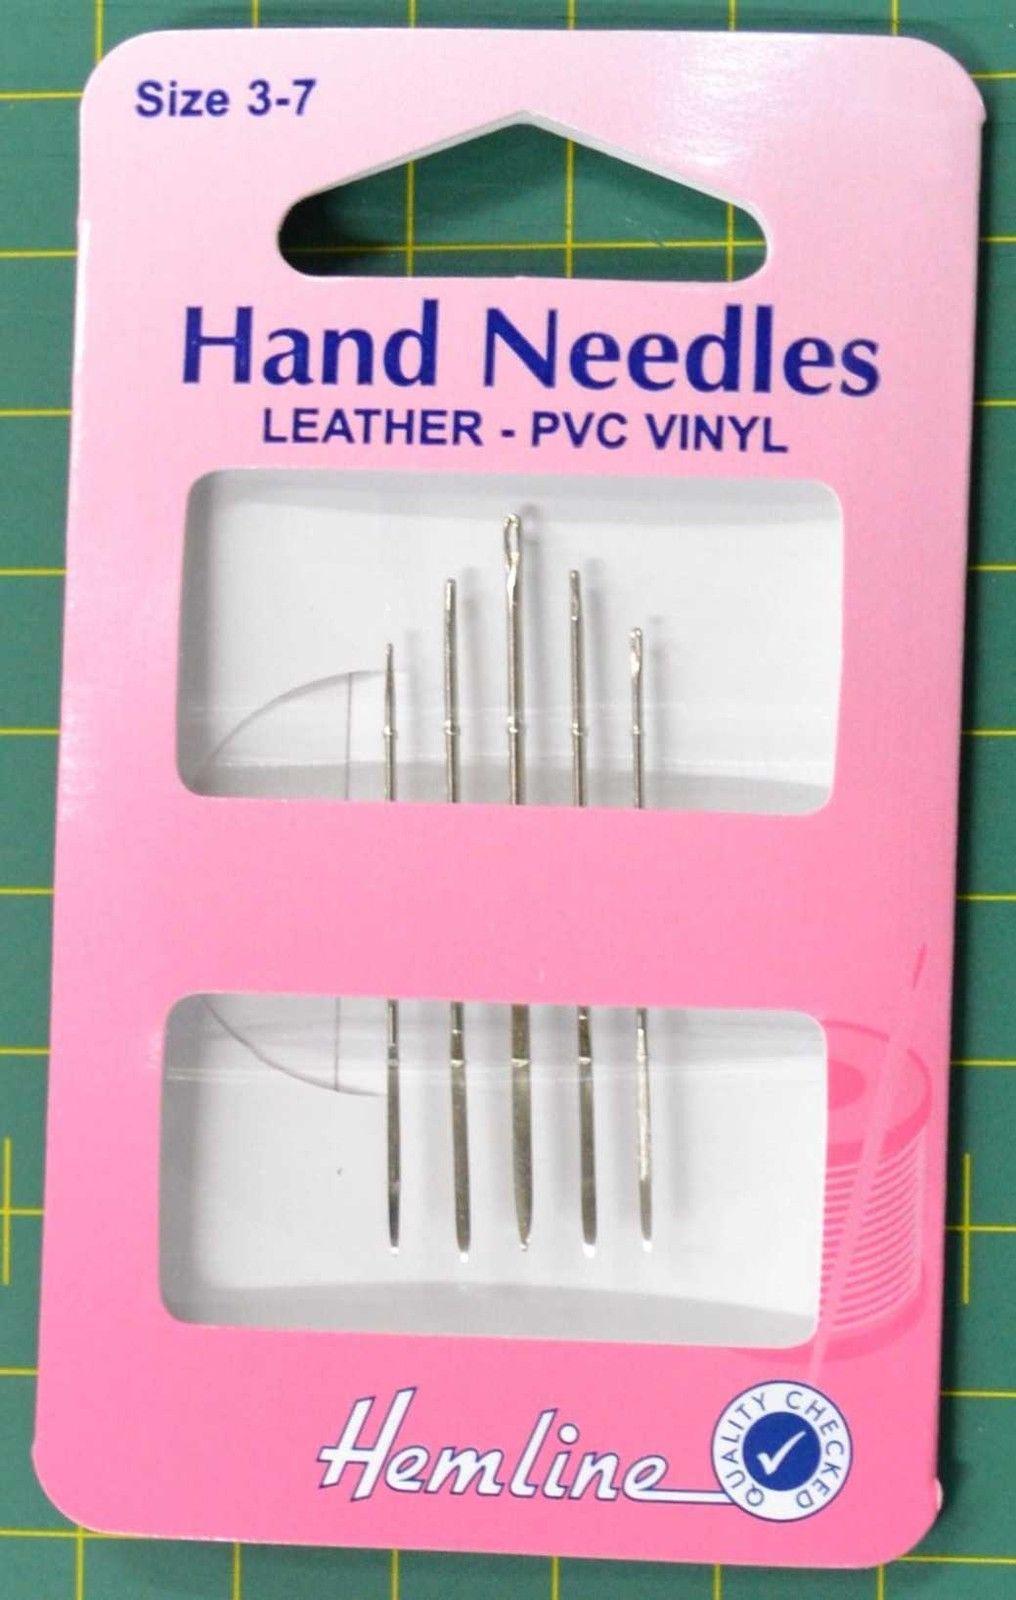 Leather Needles Size 3-7, Pack of 5, Suits Leather, PVC, Vinyl, Suede ...